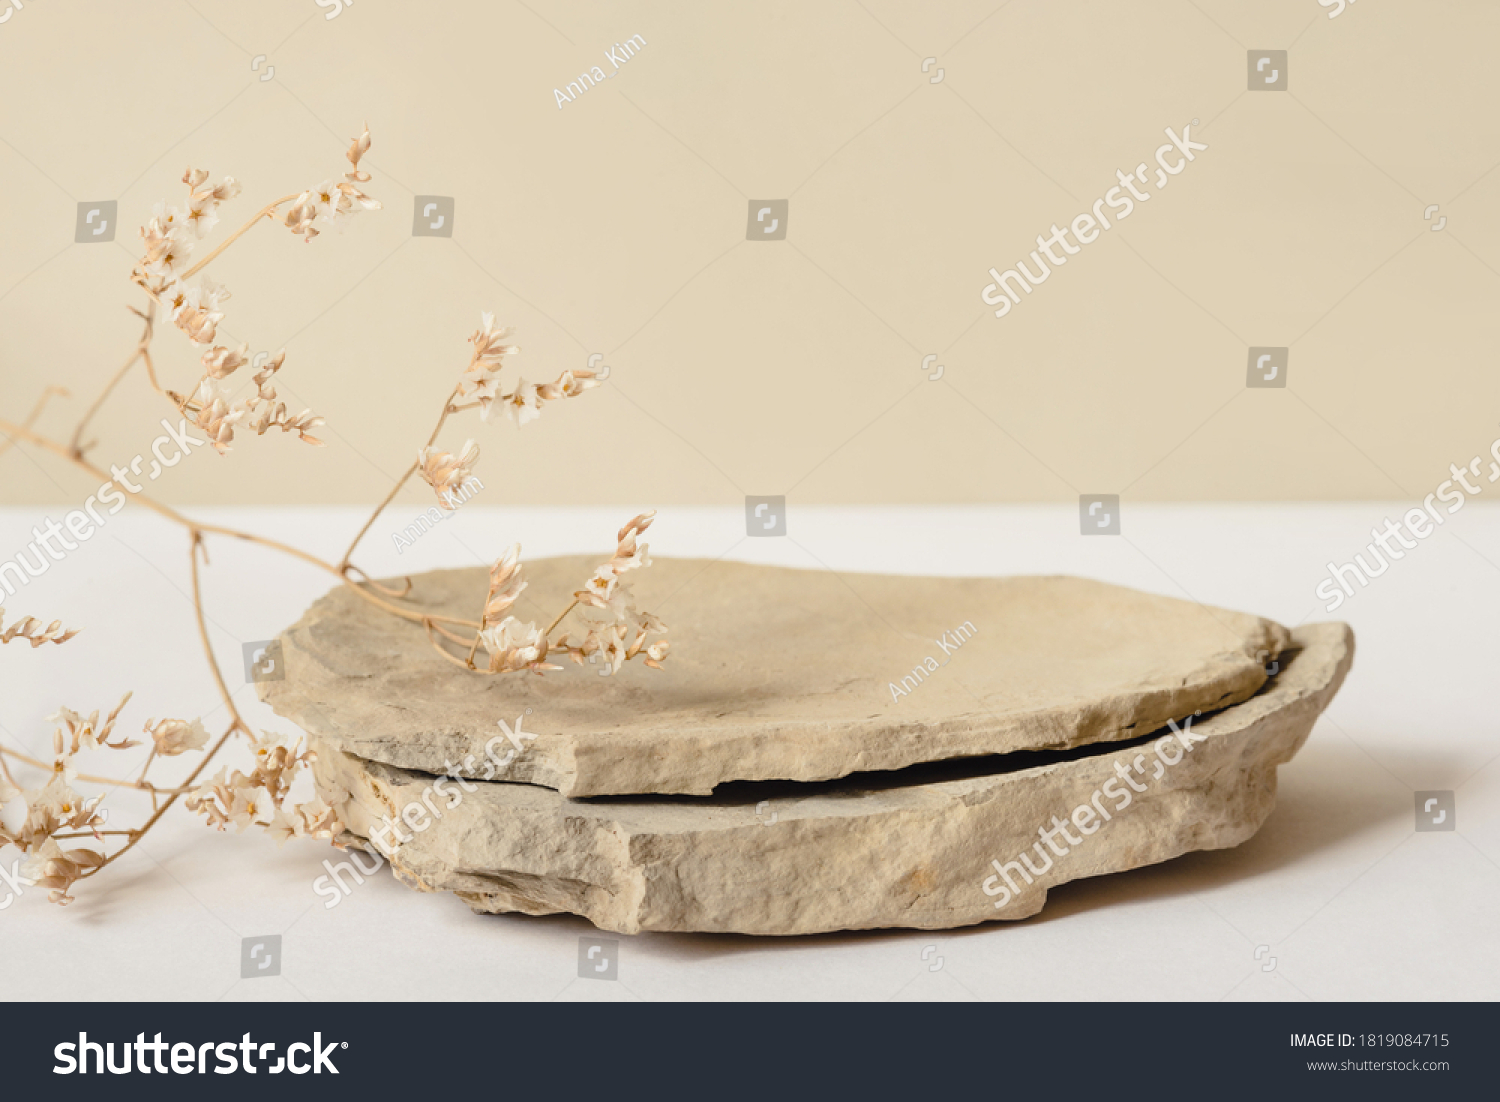 Background for cosmetic products of natural beige color. Stone podium and dry flower on a white background. Front view. #1819084715